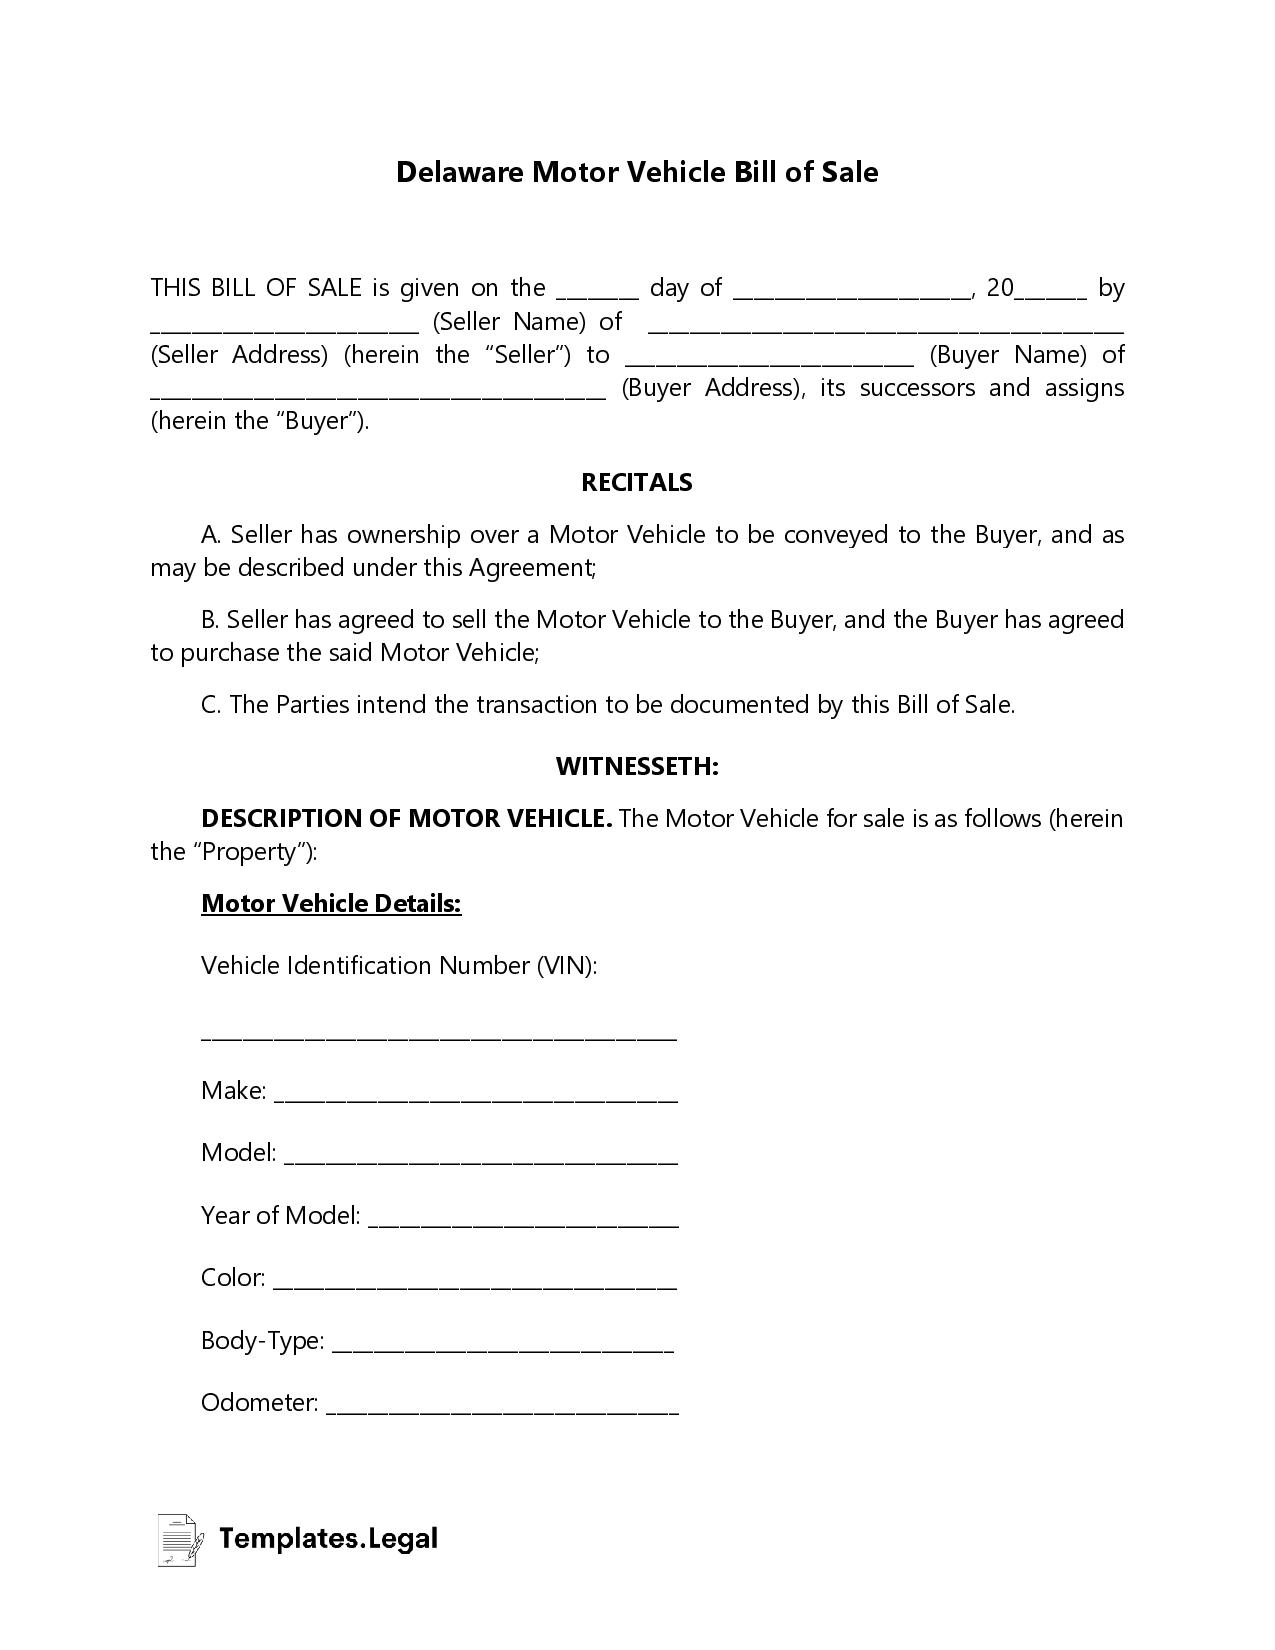 Delaware Motor Vehicle Bill of Sale - Templates.Legal